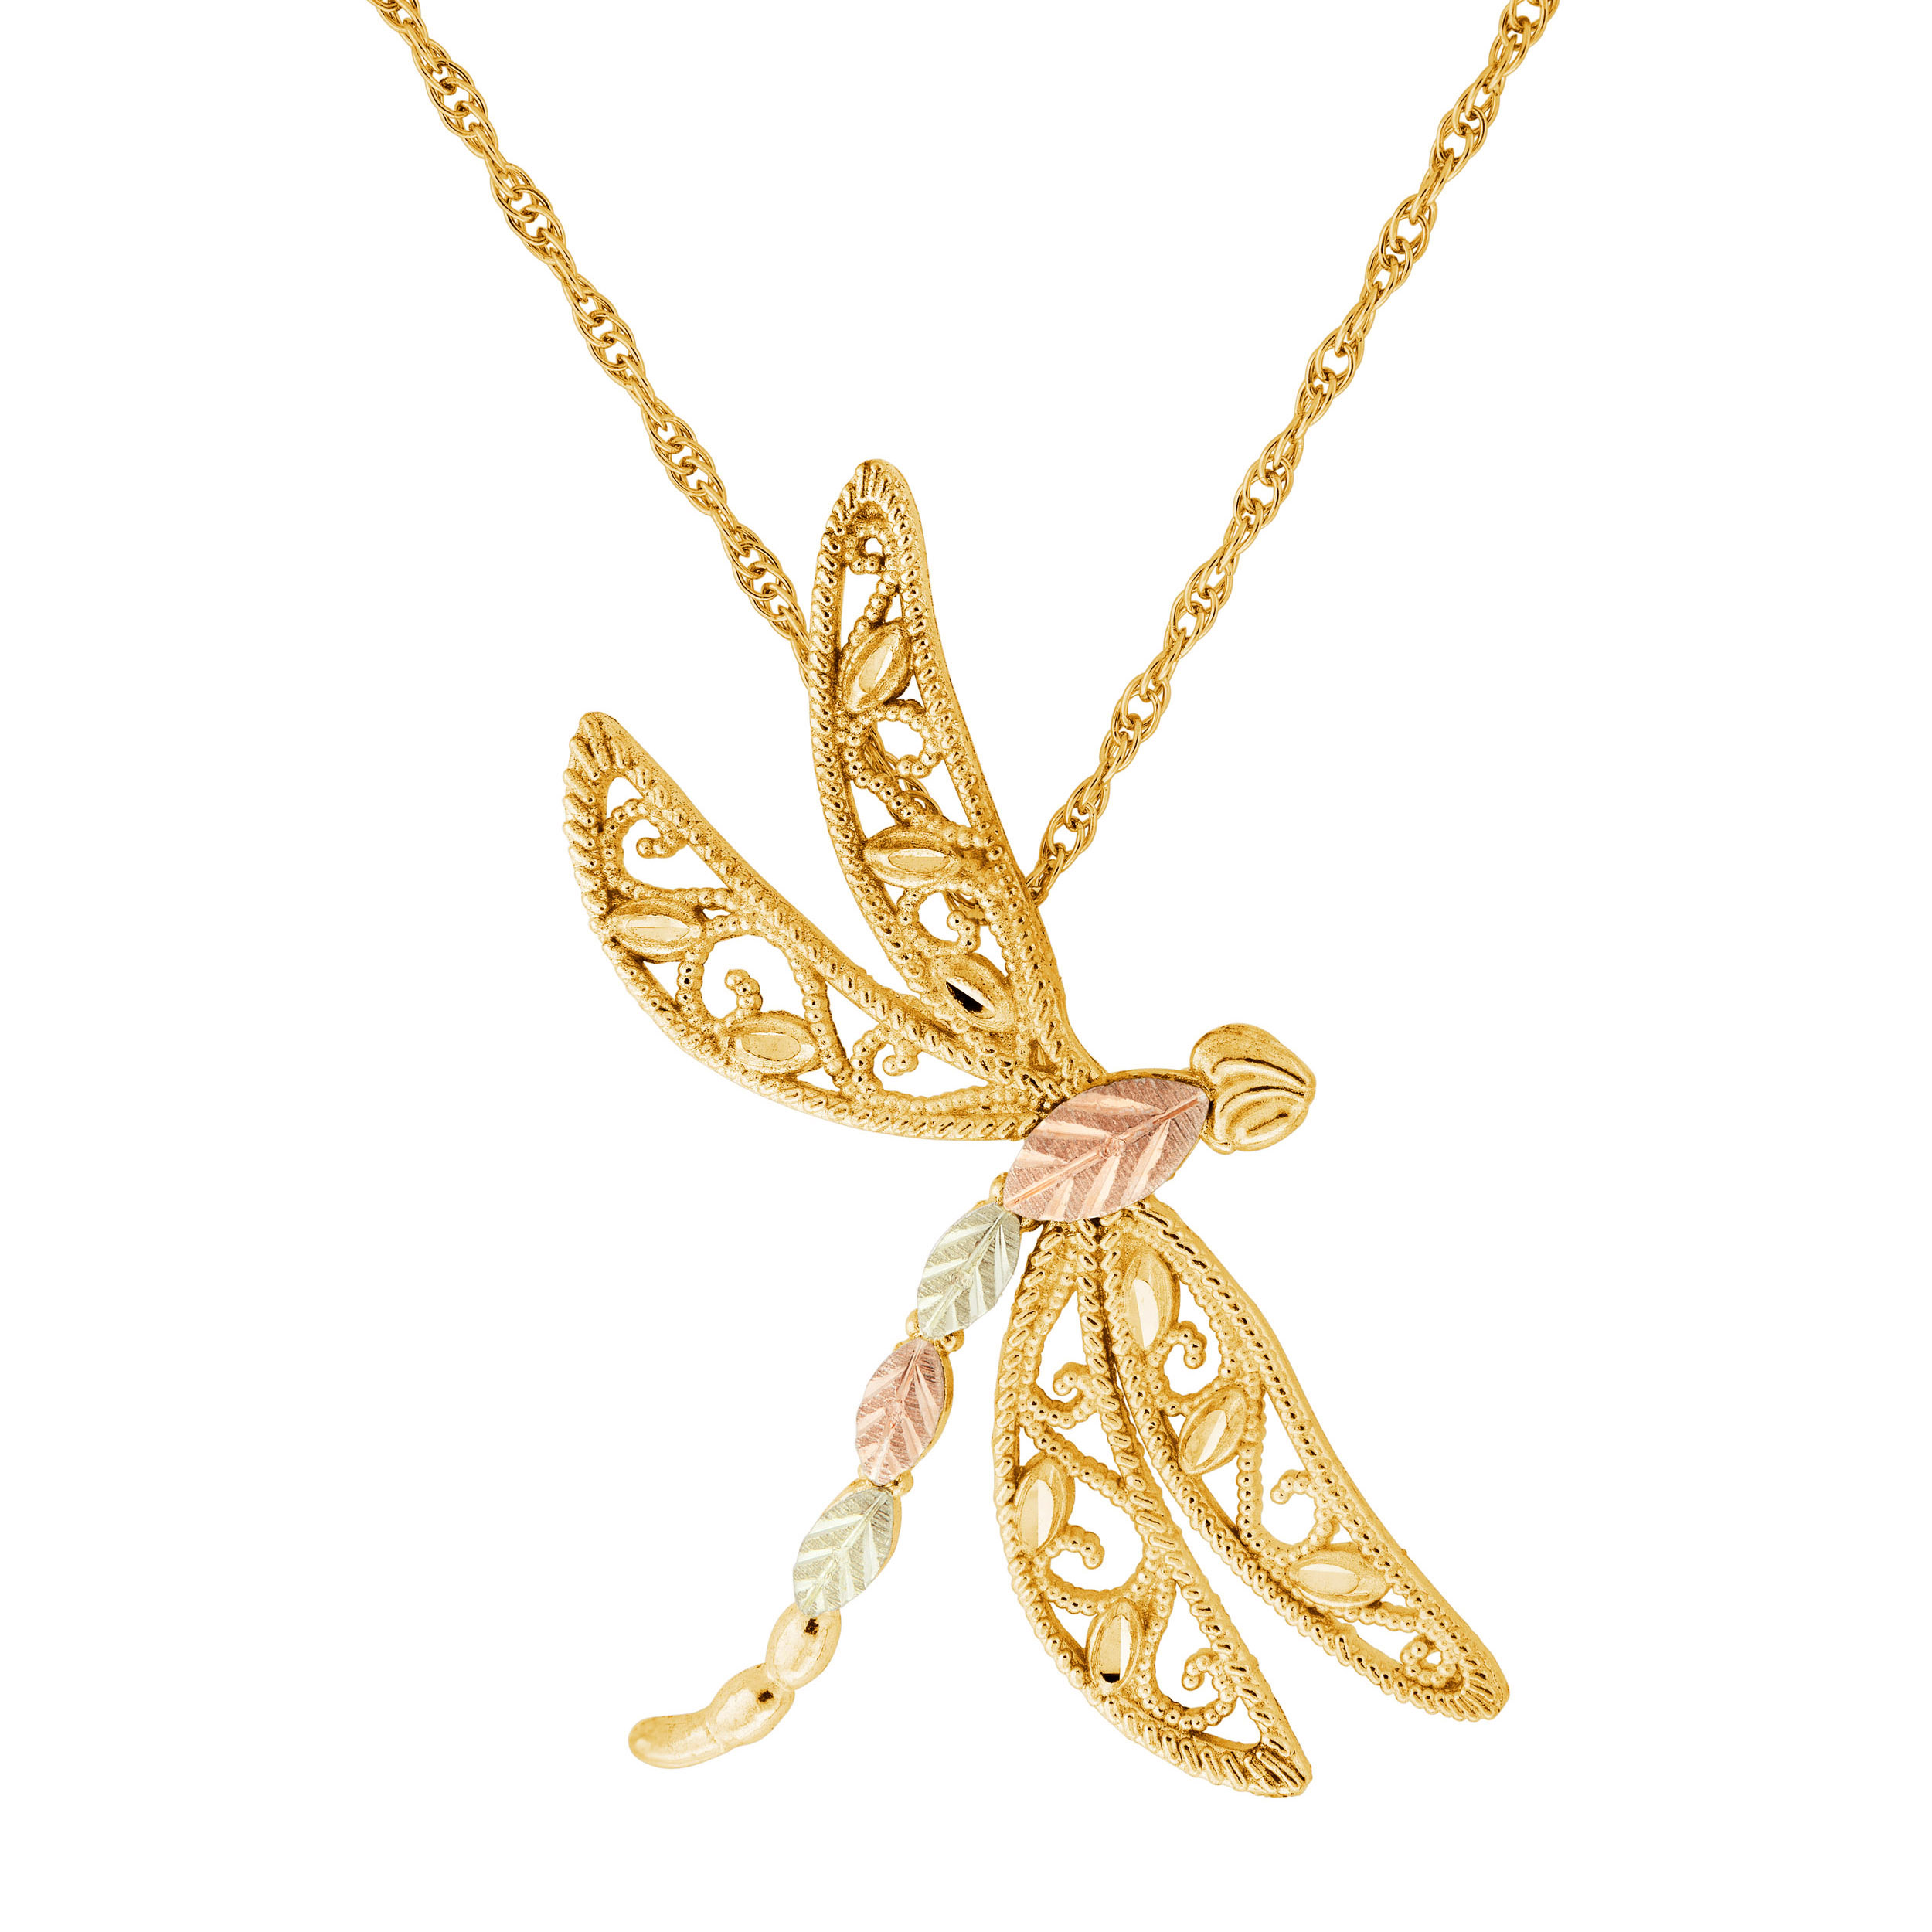 10k yellow gold Black Hills Gold dragonfly necklace with 12k green and rose gold, suspended from an 18 inch gold-filled rope chain.